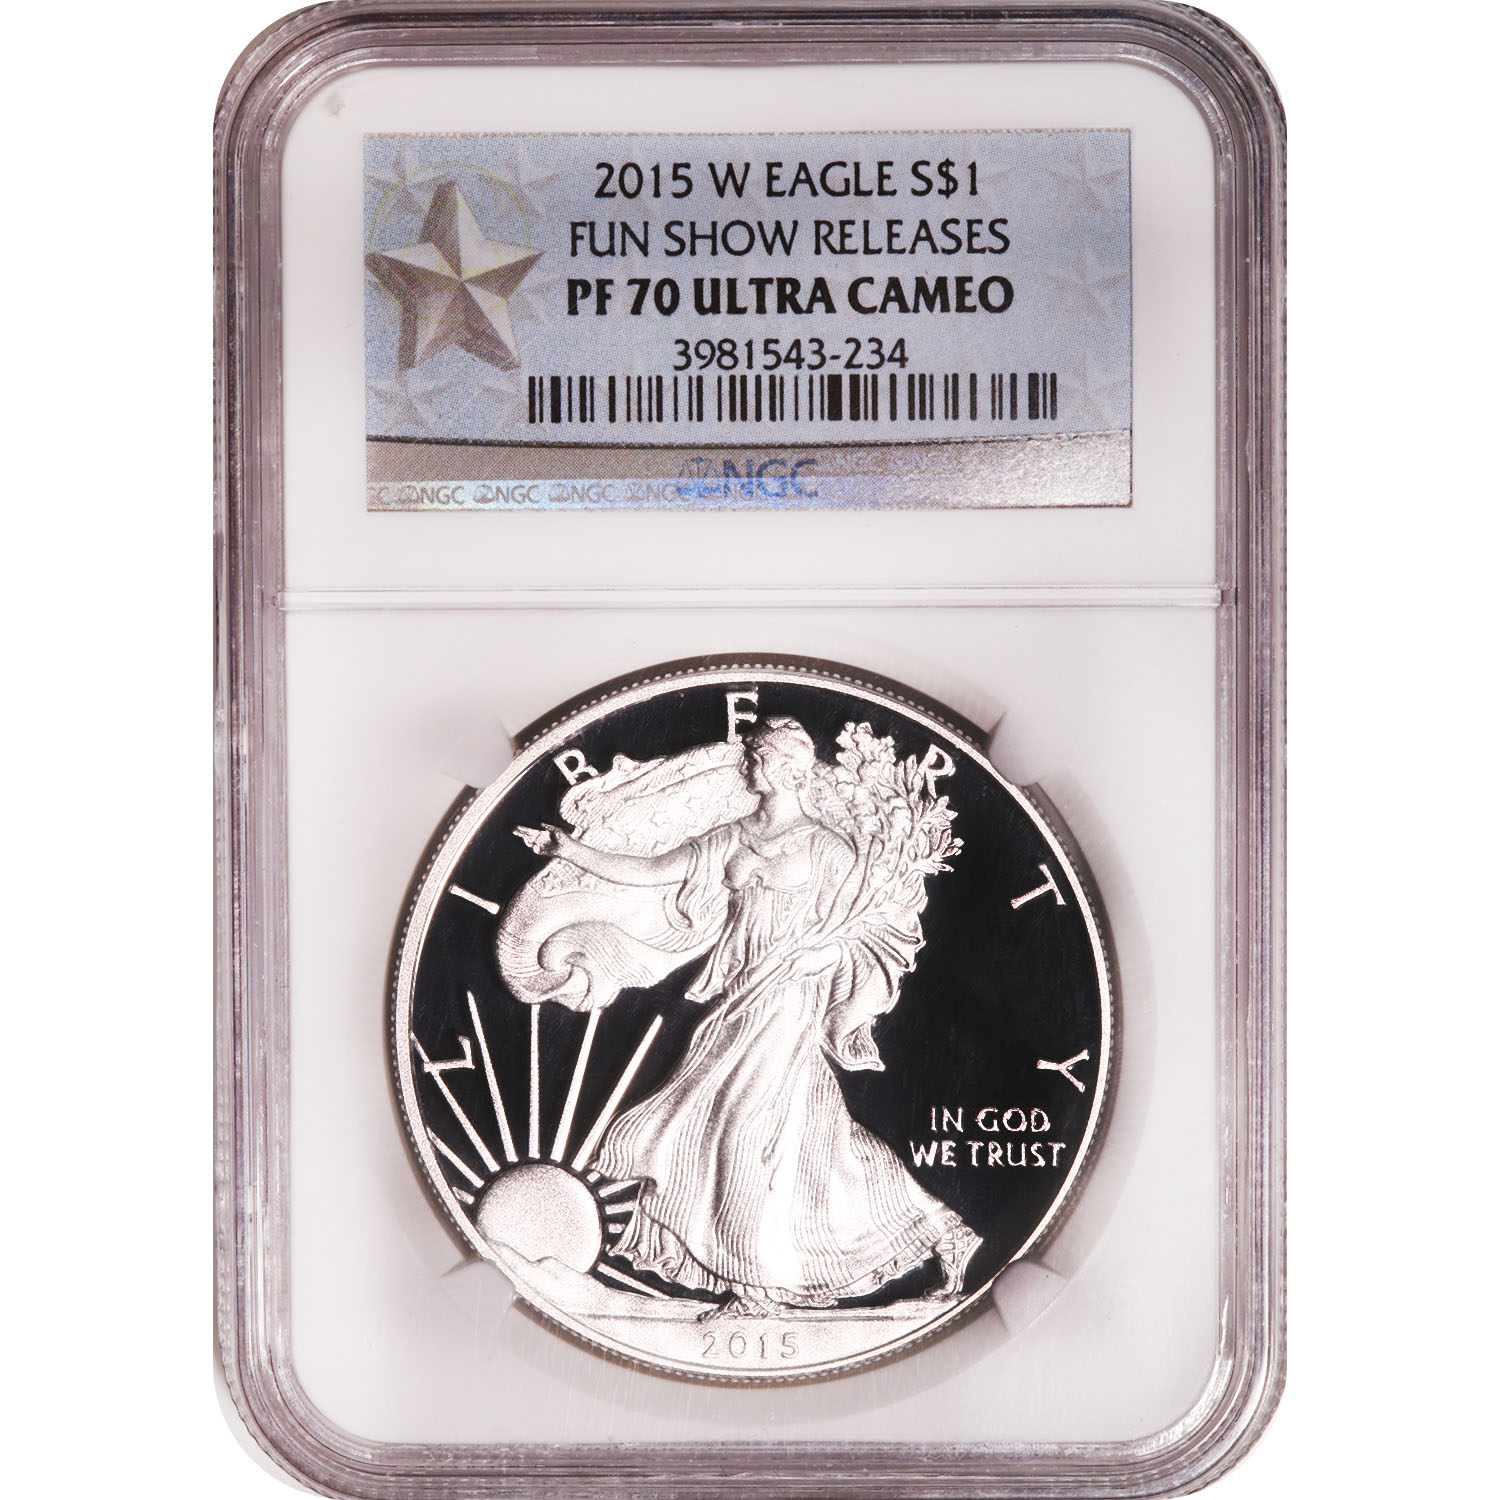 Certified Proof Silver Eagle 2015-W PF70 Fun Show Releases